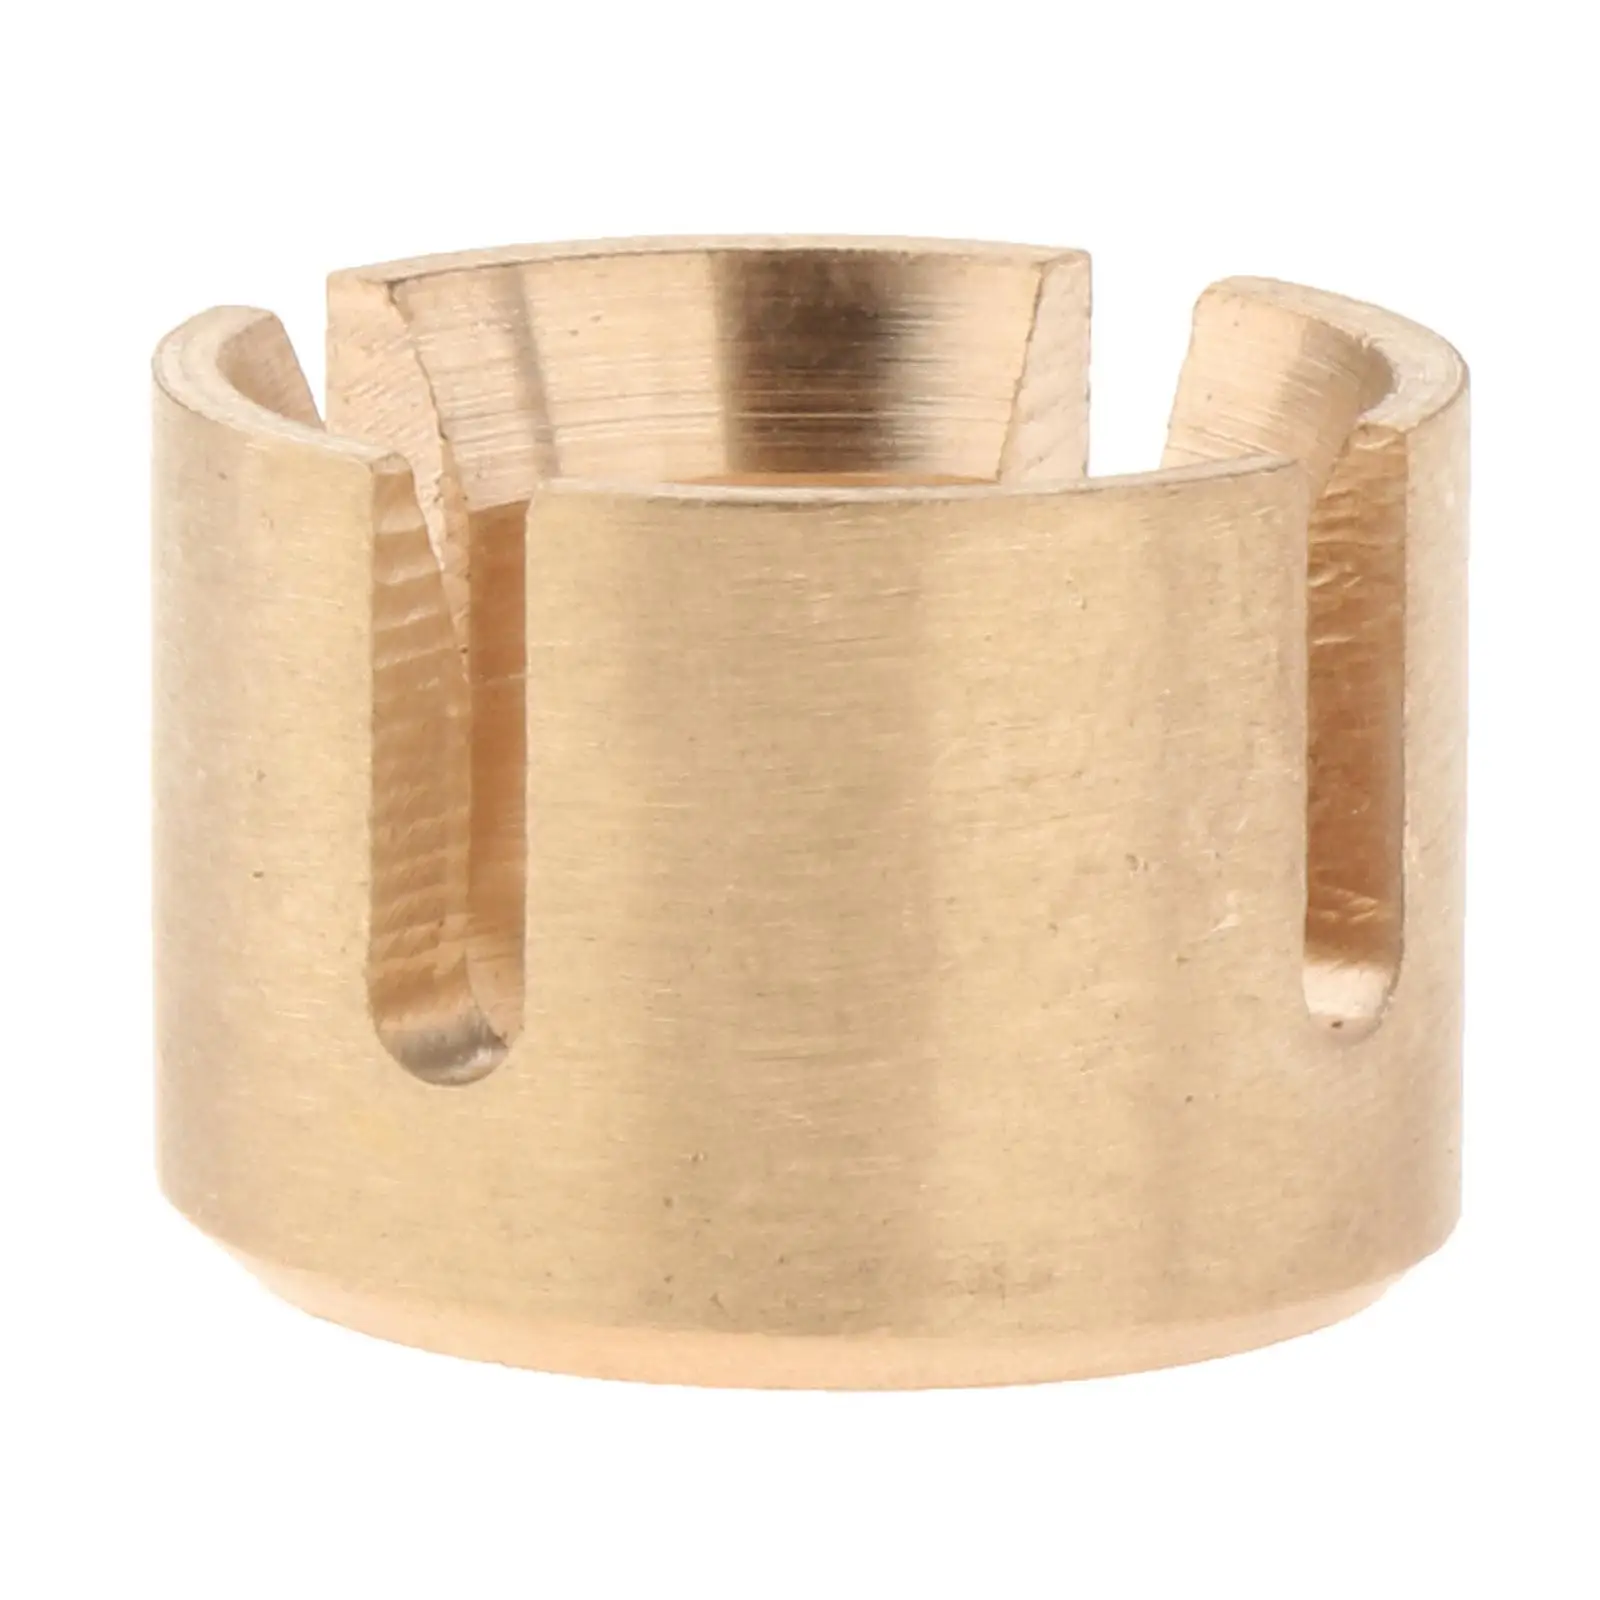 Solid Shifter Bushing Replaces Spare Parts Copper Accessories ,Fits for  S13  , R34, GT S14  S14 